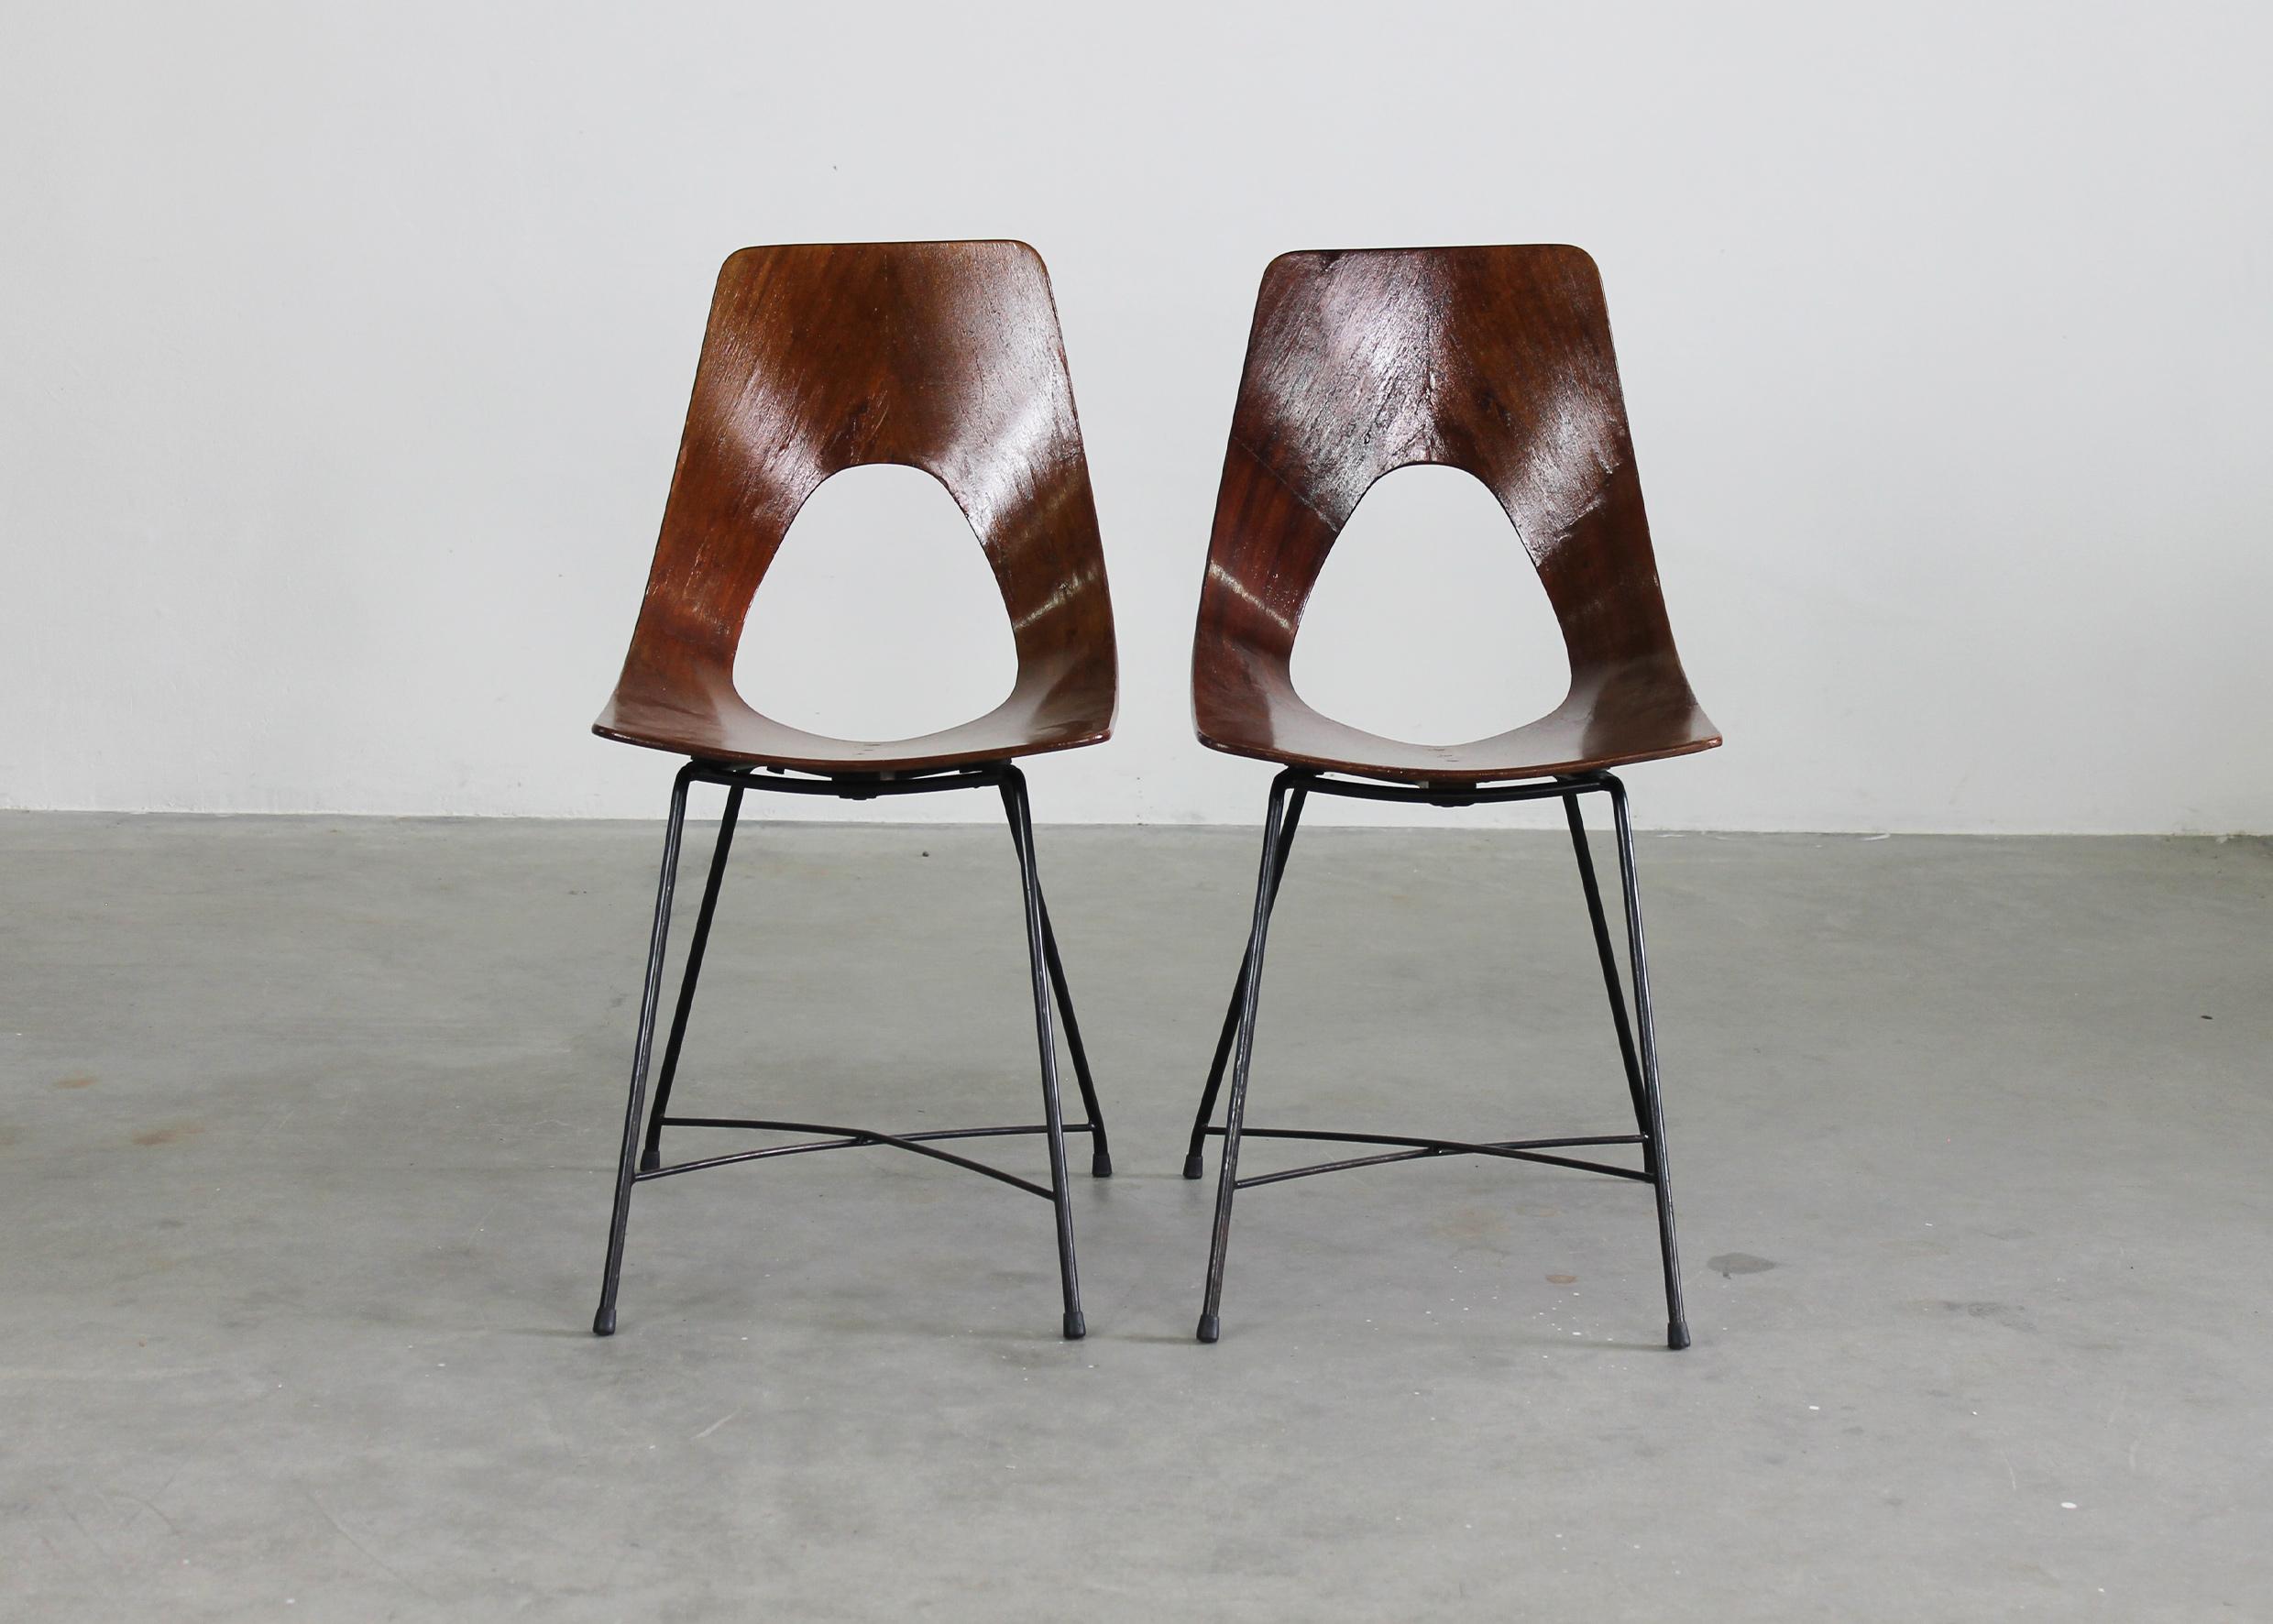 Set of two dining chairs model Ariston with structure in curved plywood and black lacquered metal legs. 
The Ariston chair was designed by Augusto Bozzi and manufactured by Saporiti during the 1950s (the manufacturer's label is visible under the